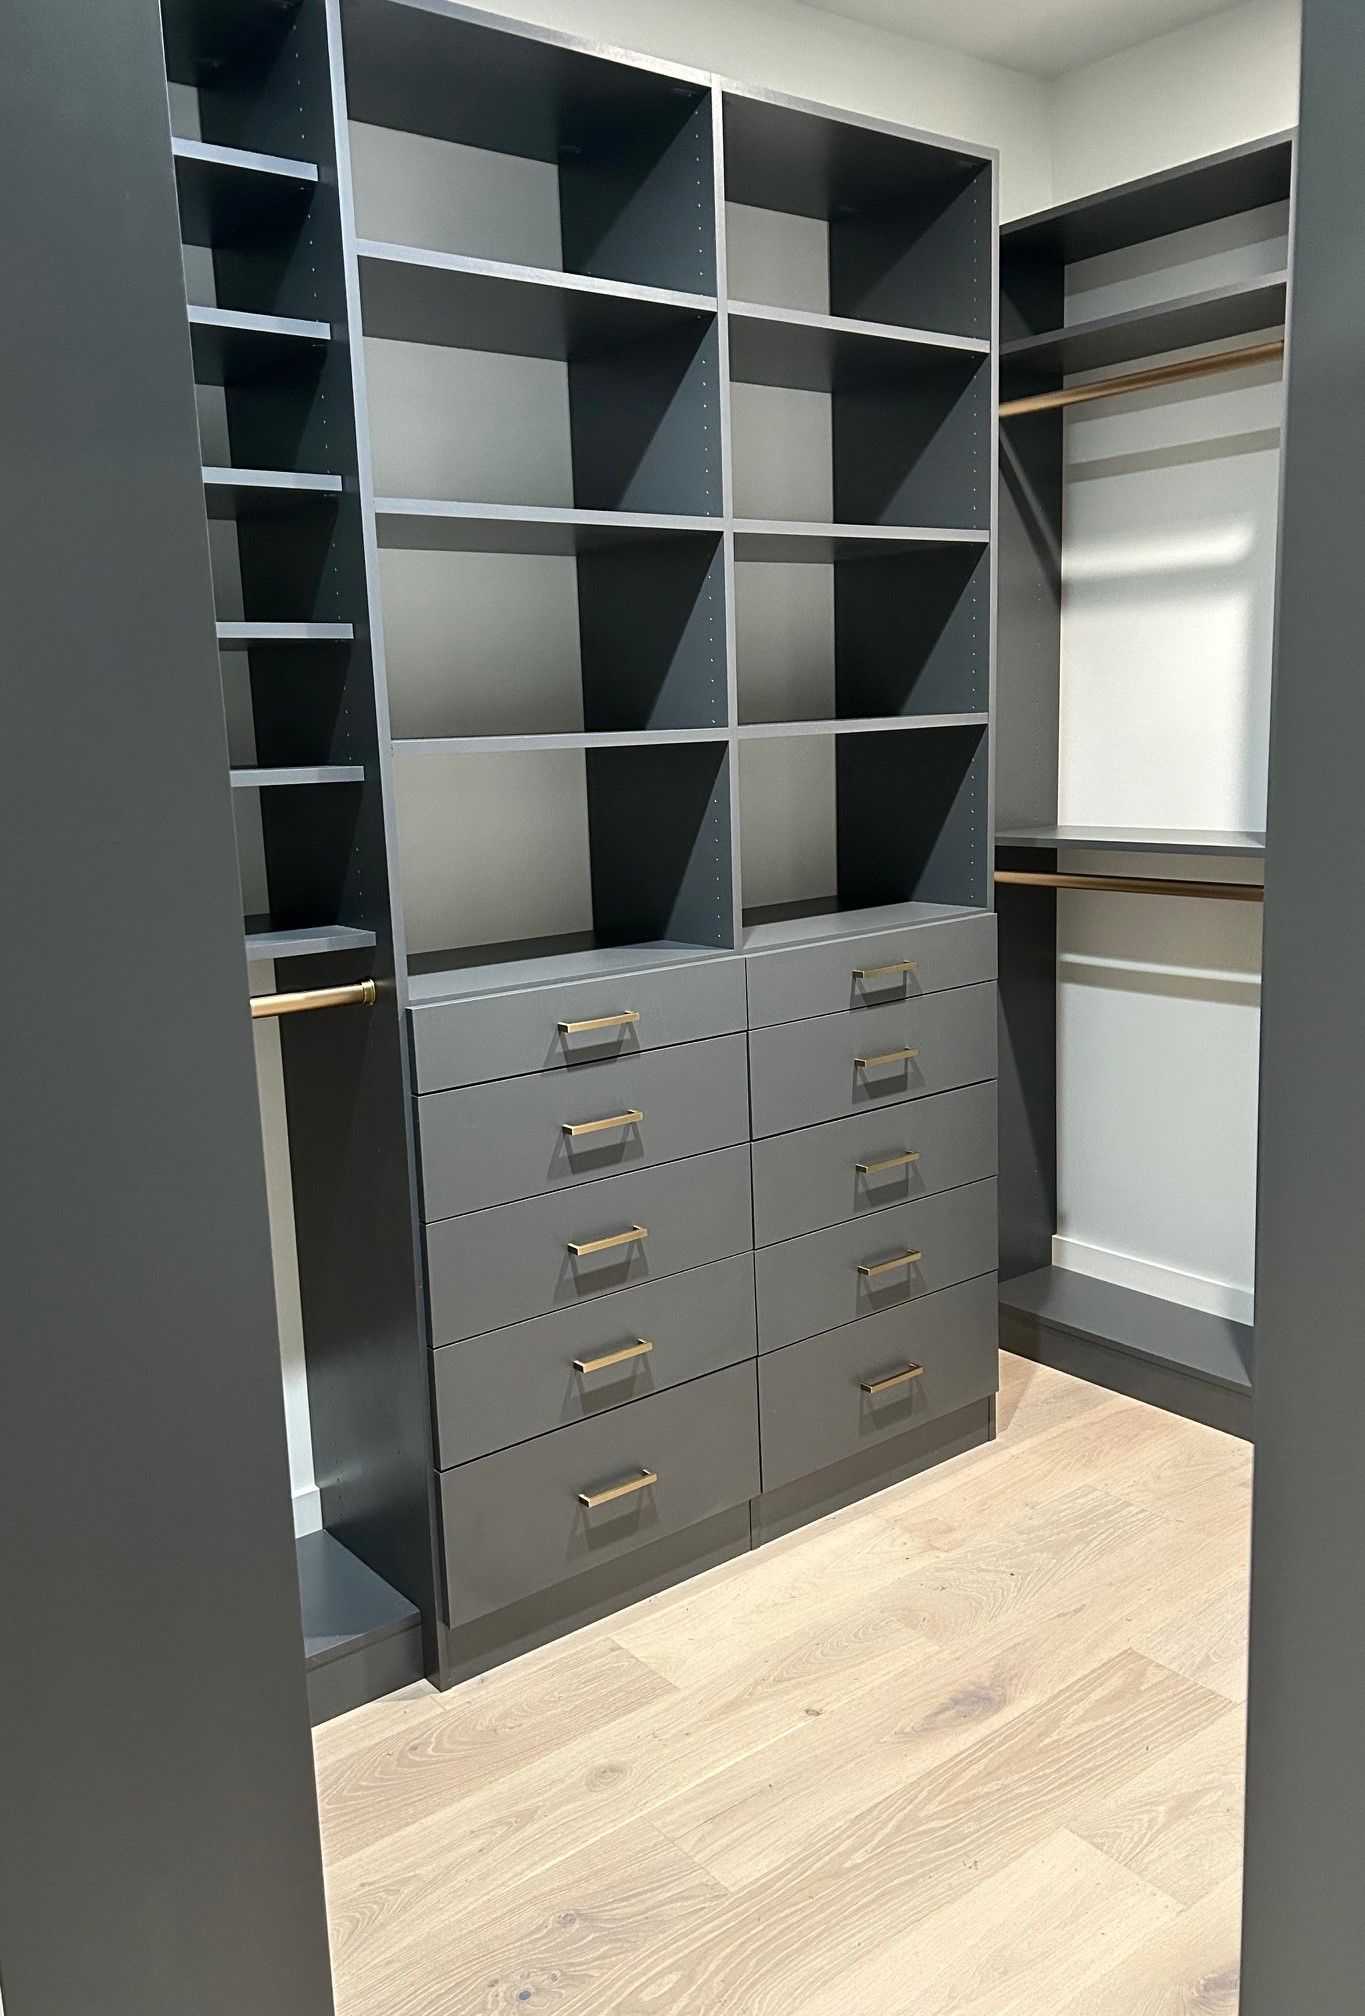 A walk in closet with lots of shelves and drawers.